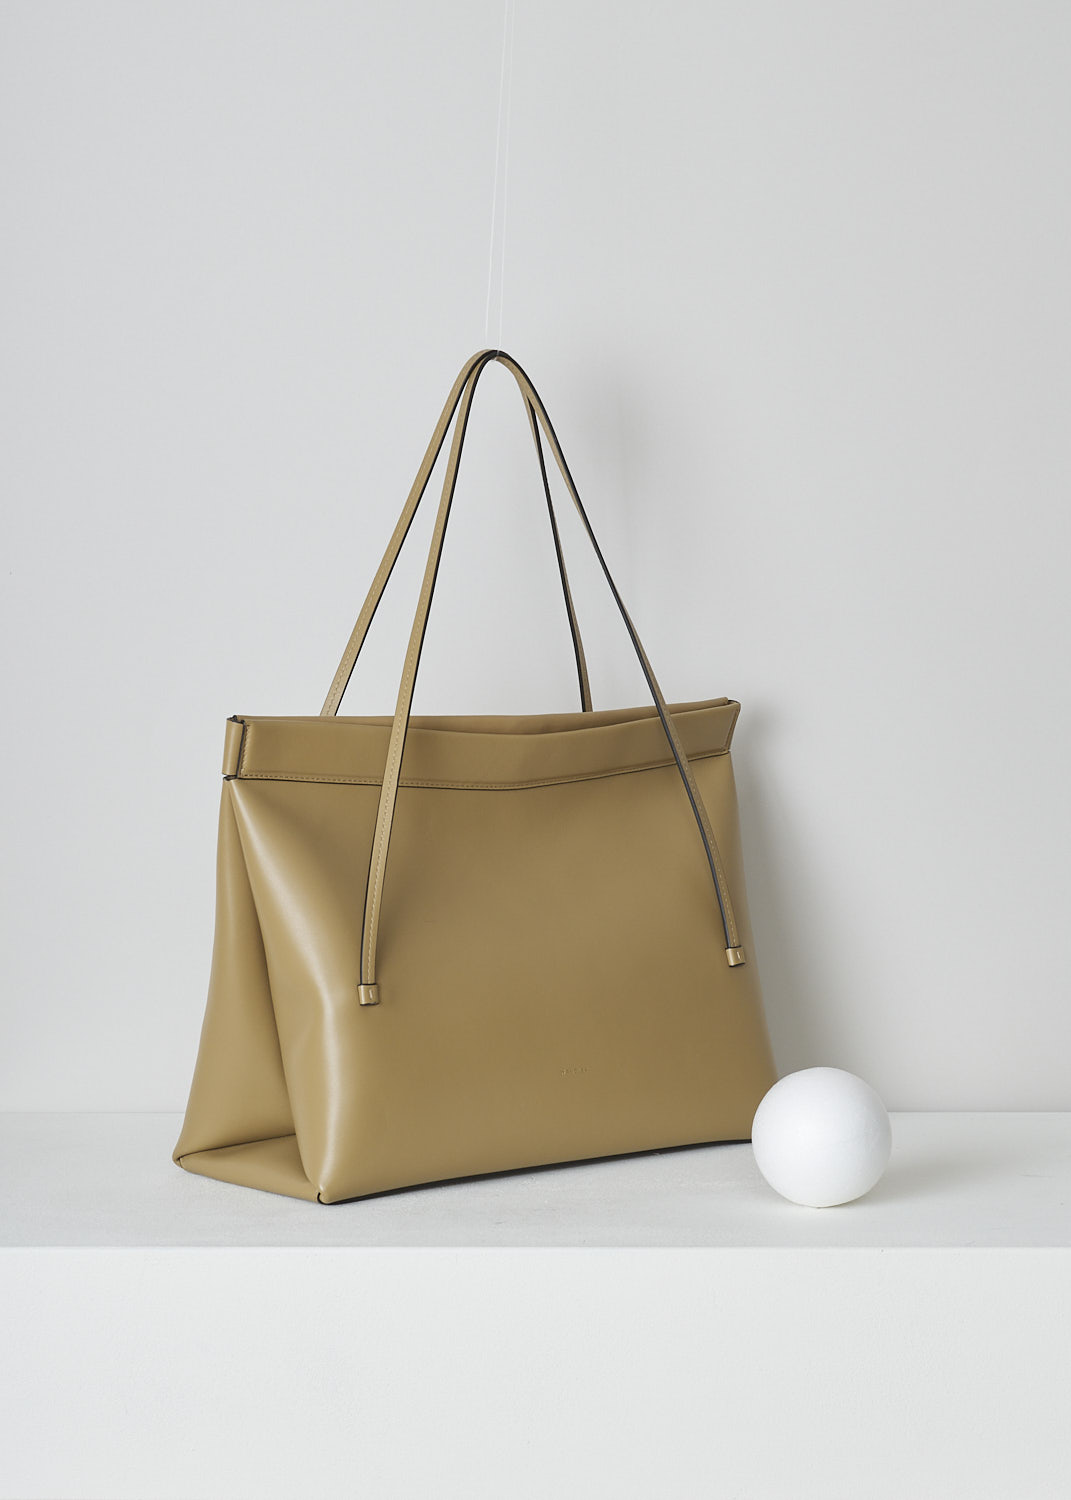 WANDLER, JOANNA MEDIUM BAG IN SOIL, JOANNA_MEDIUM_SOIL_22108_1013901_1709, Beige, Side, This Joanna medium hand bag in Soil has slim top handles. The magnetic strip closure opens up to the single spacious compartment. On the front, the brand's lettering can be found in gold.  
